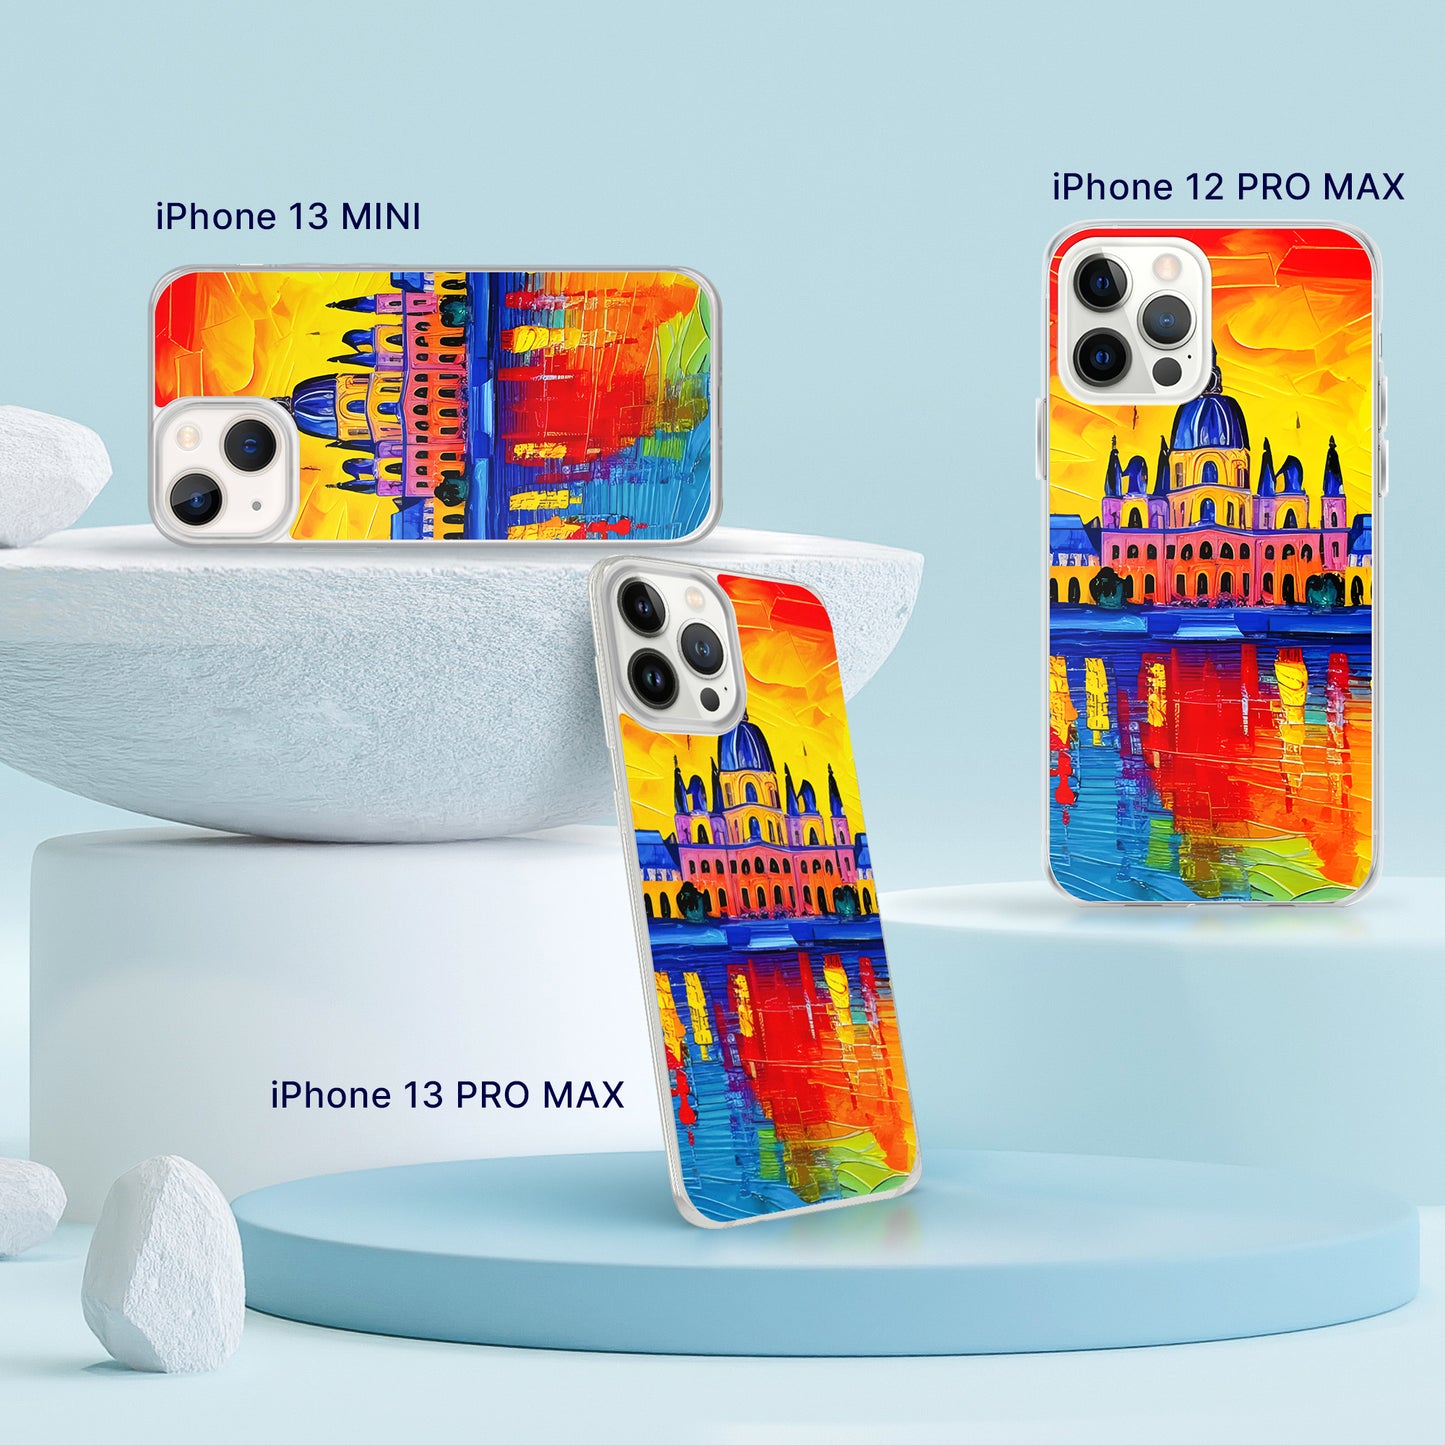 Fashionable iPhone Case with cityscape painting - Wien, Schonbrunn Palace | Seepu | 13 MINI, 12 PRO MAX, 13 PRO MAX